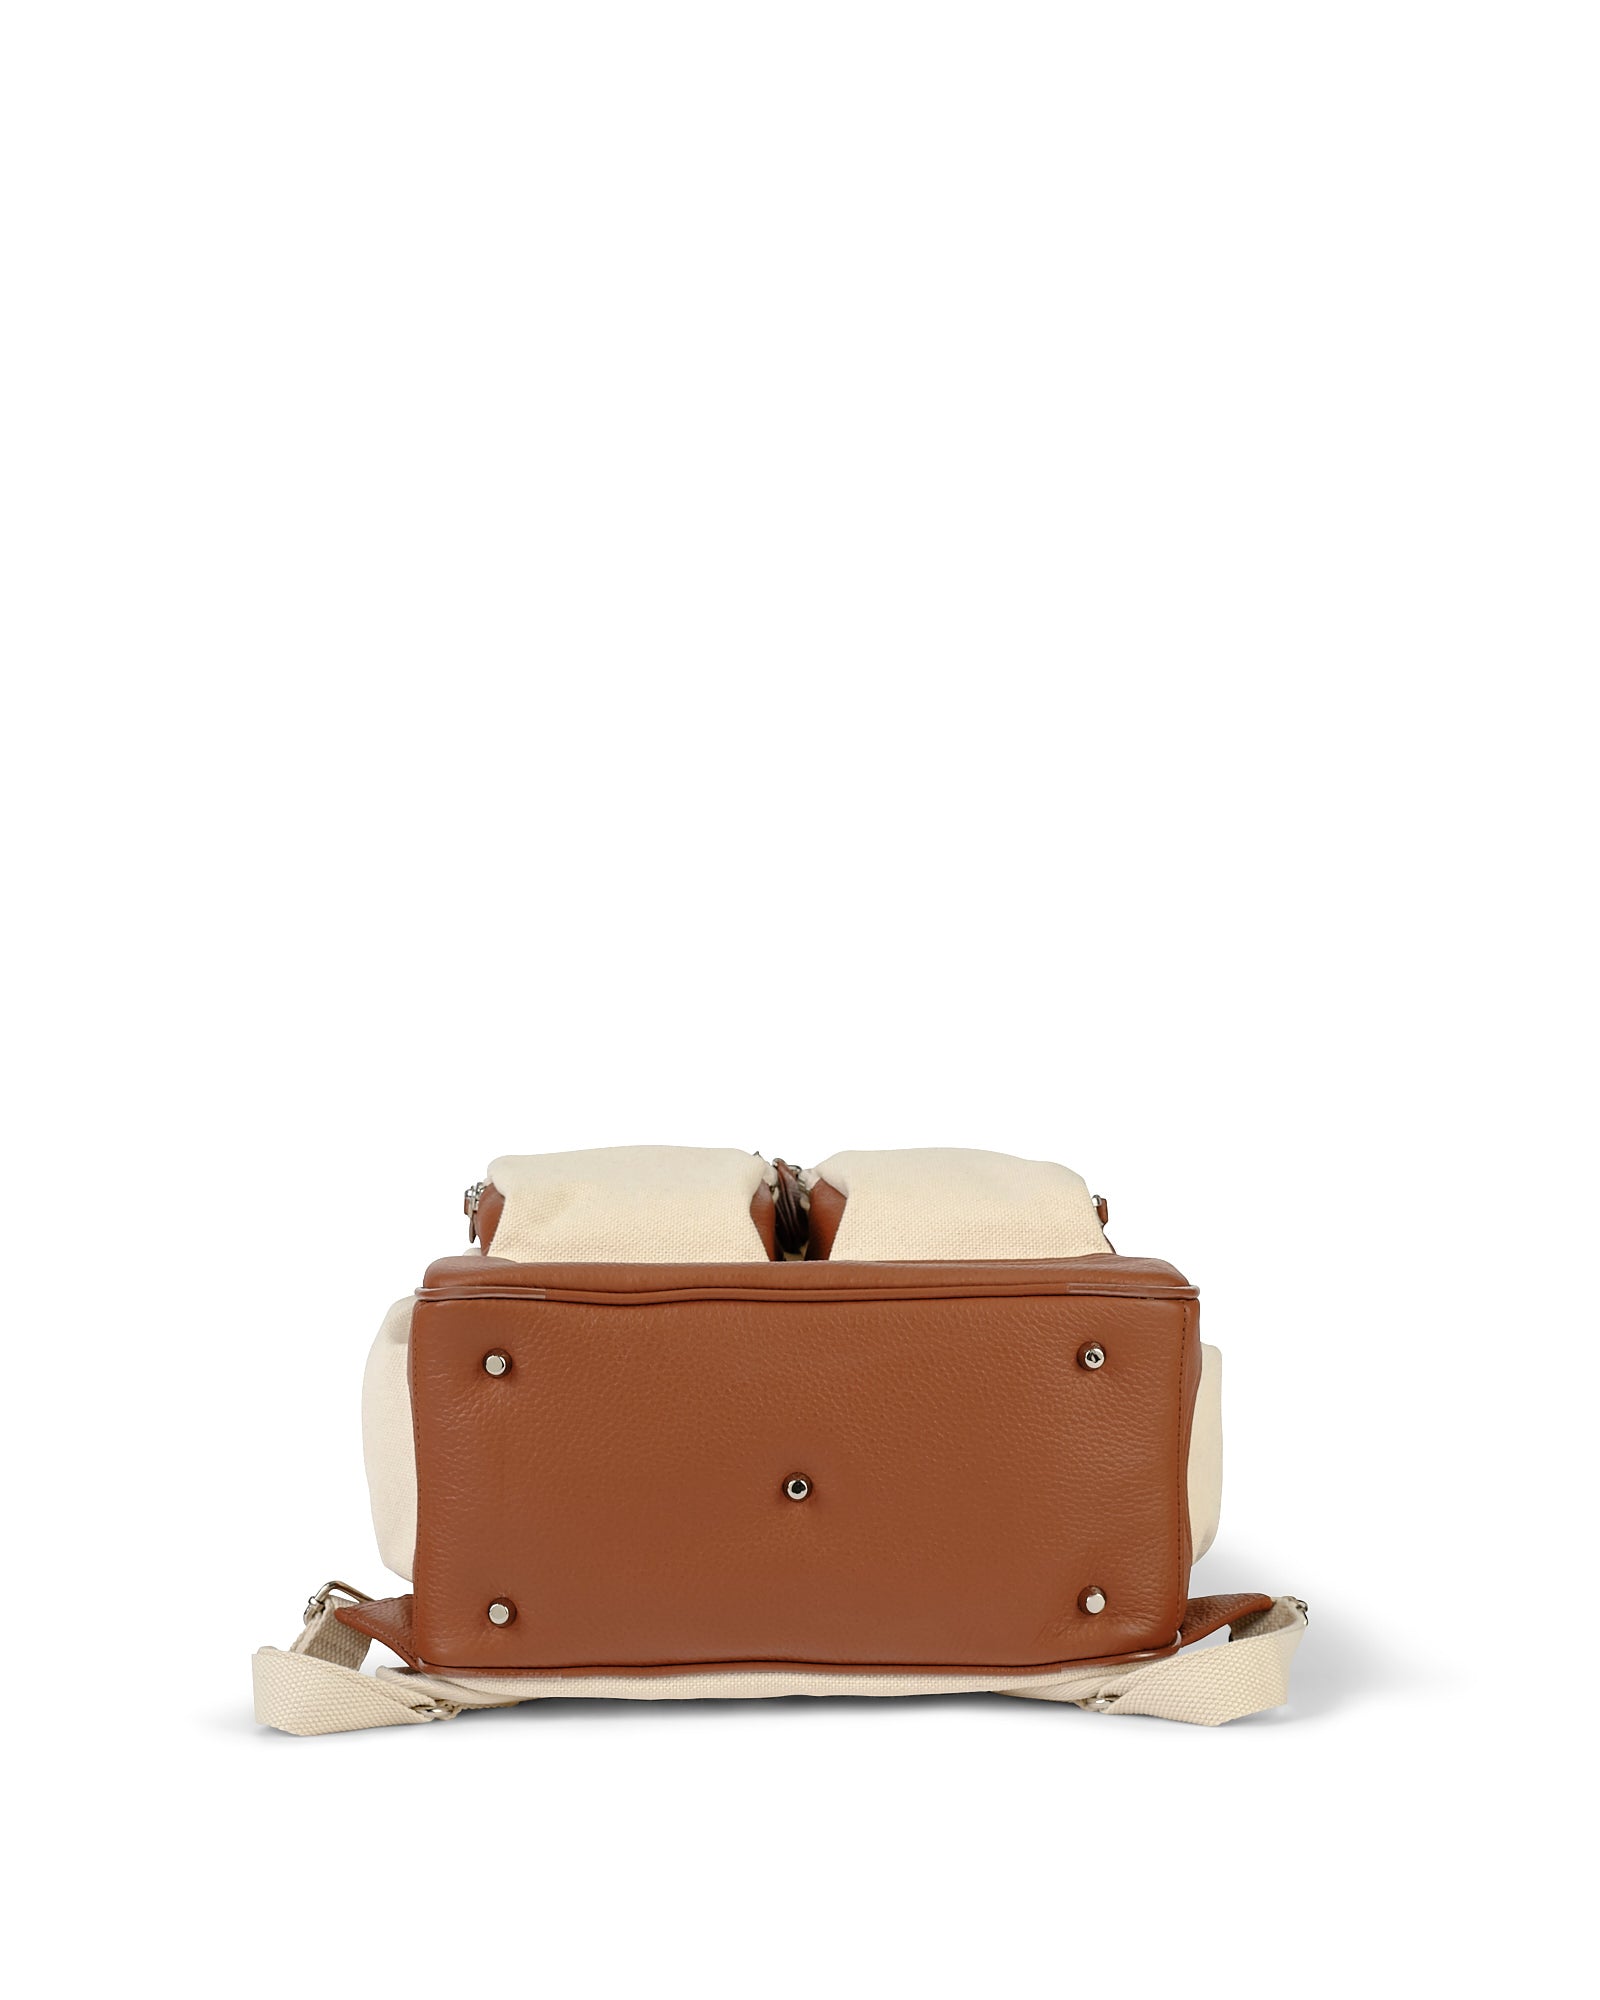 OiOi Natural Canvas Backpack - Chestnut Trim